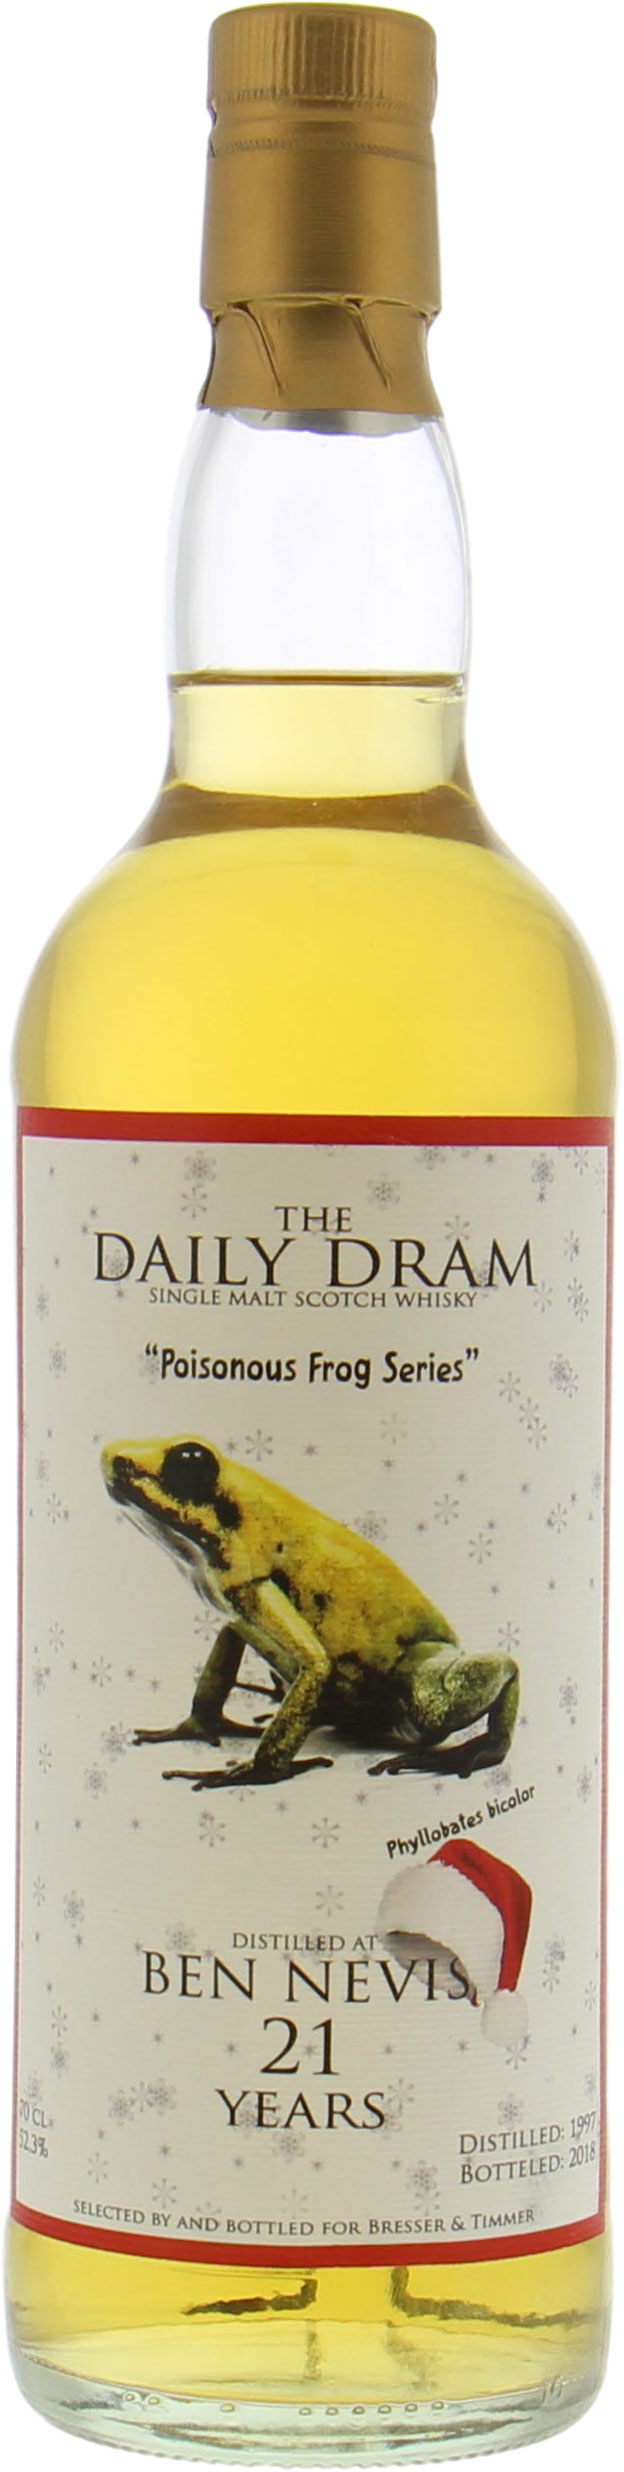 Ben Nevis - Daily Dram 21 Years Old Poisonous Frog Christmas Edition 52.3% 1997 Perfect